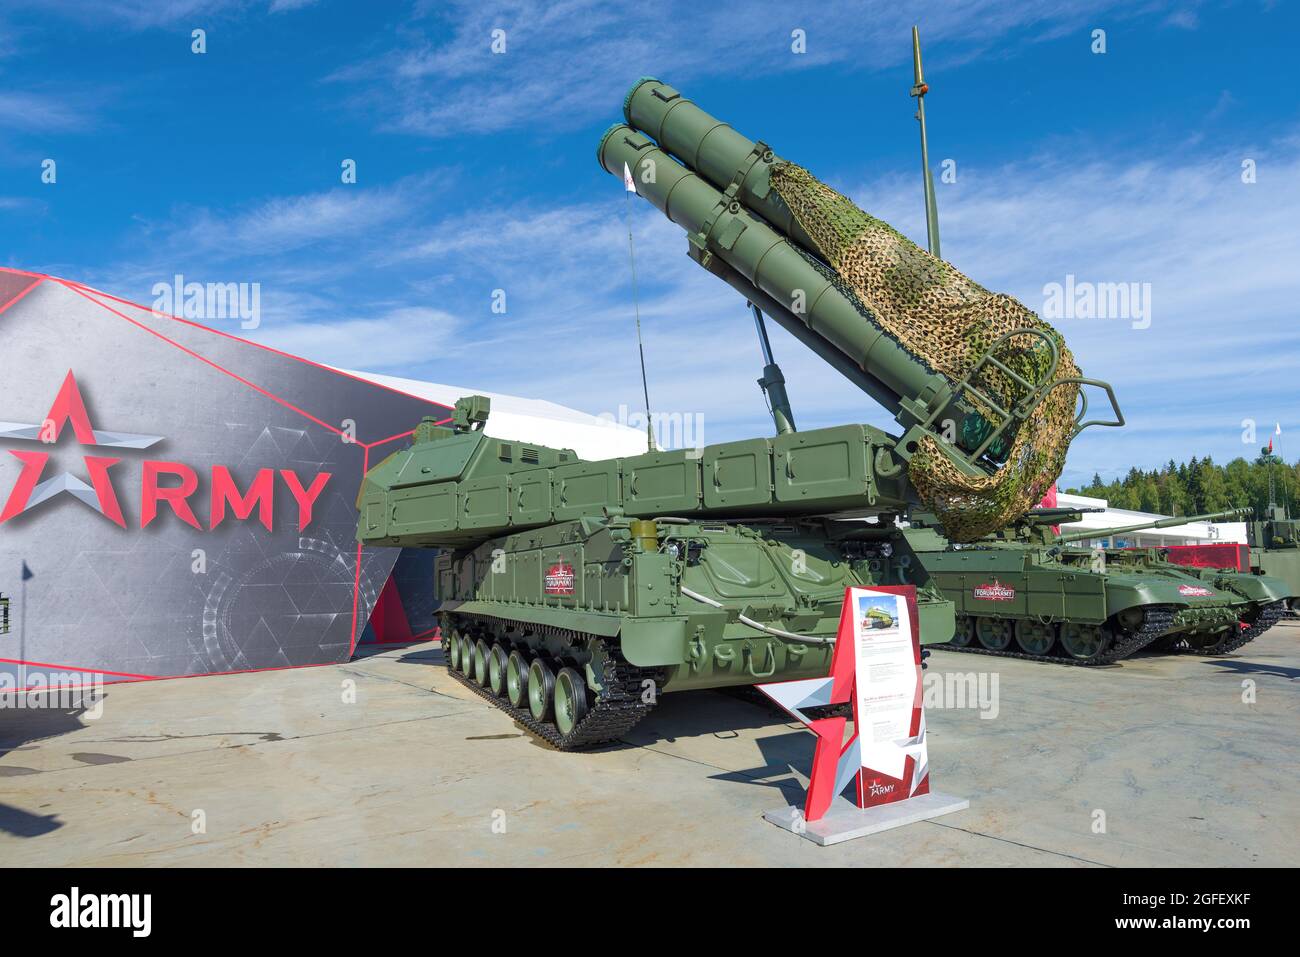 MOSCOW REGION, RUSSIA - AUGUST 27, 2021: Self-propelled fire launcher 9A317M Buk-M3 anti-aircraft missile system on the exposition of the Army-202 int Stock Photo